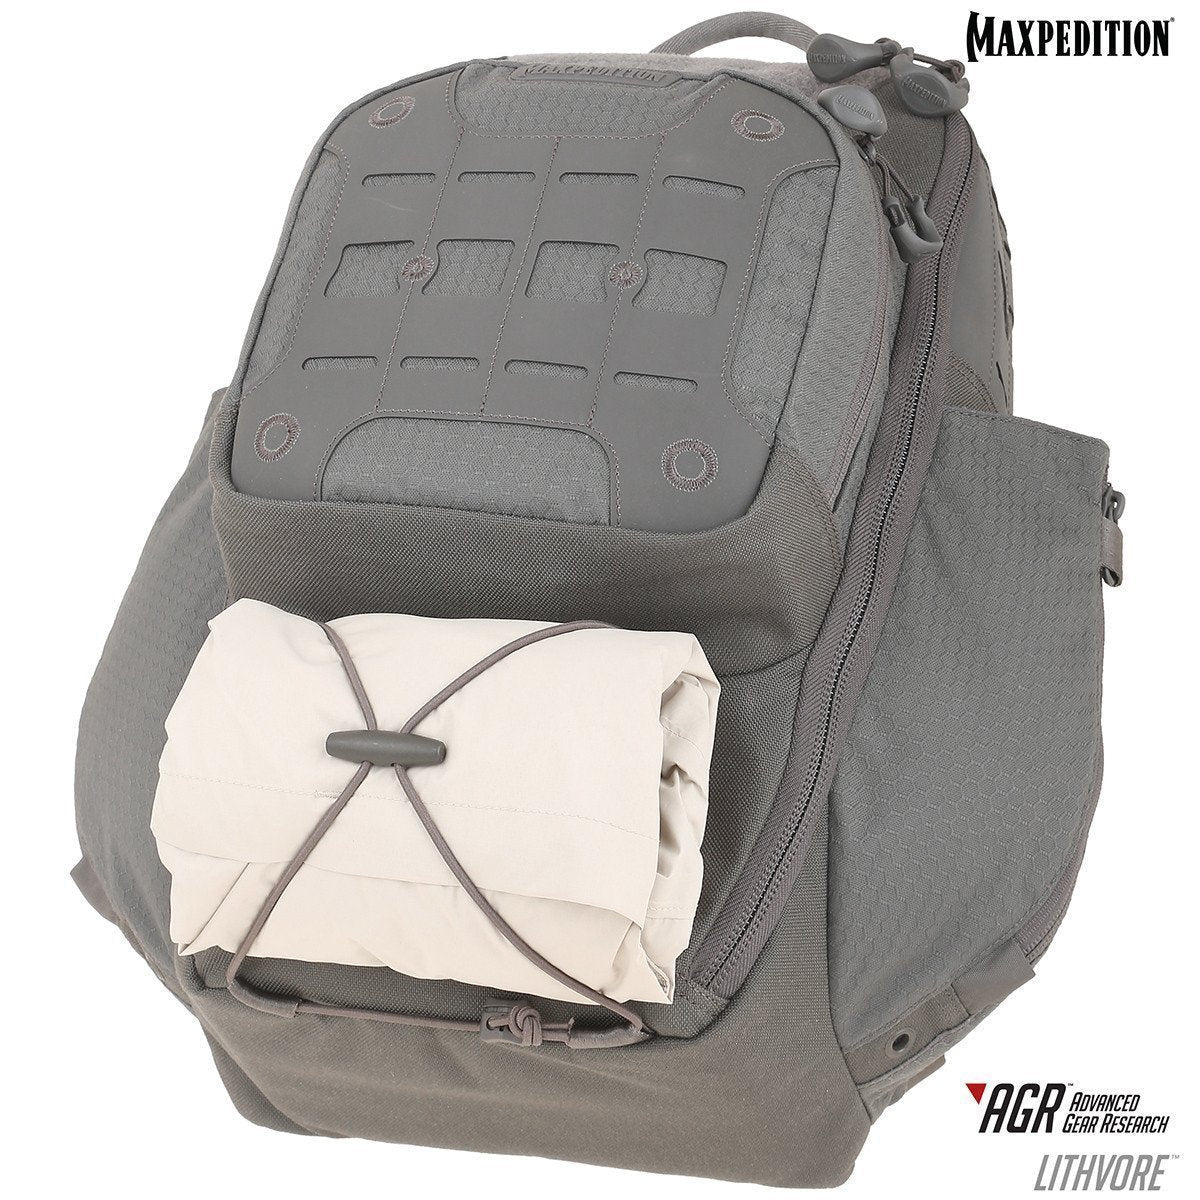 Maxpedition Lithvore Everyday Backpack 17L Backpacks Maxpedition Tactical Gear Supplier Tactical Distributors Australia